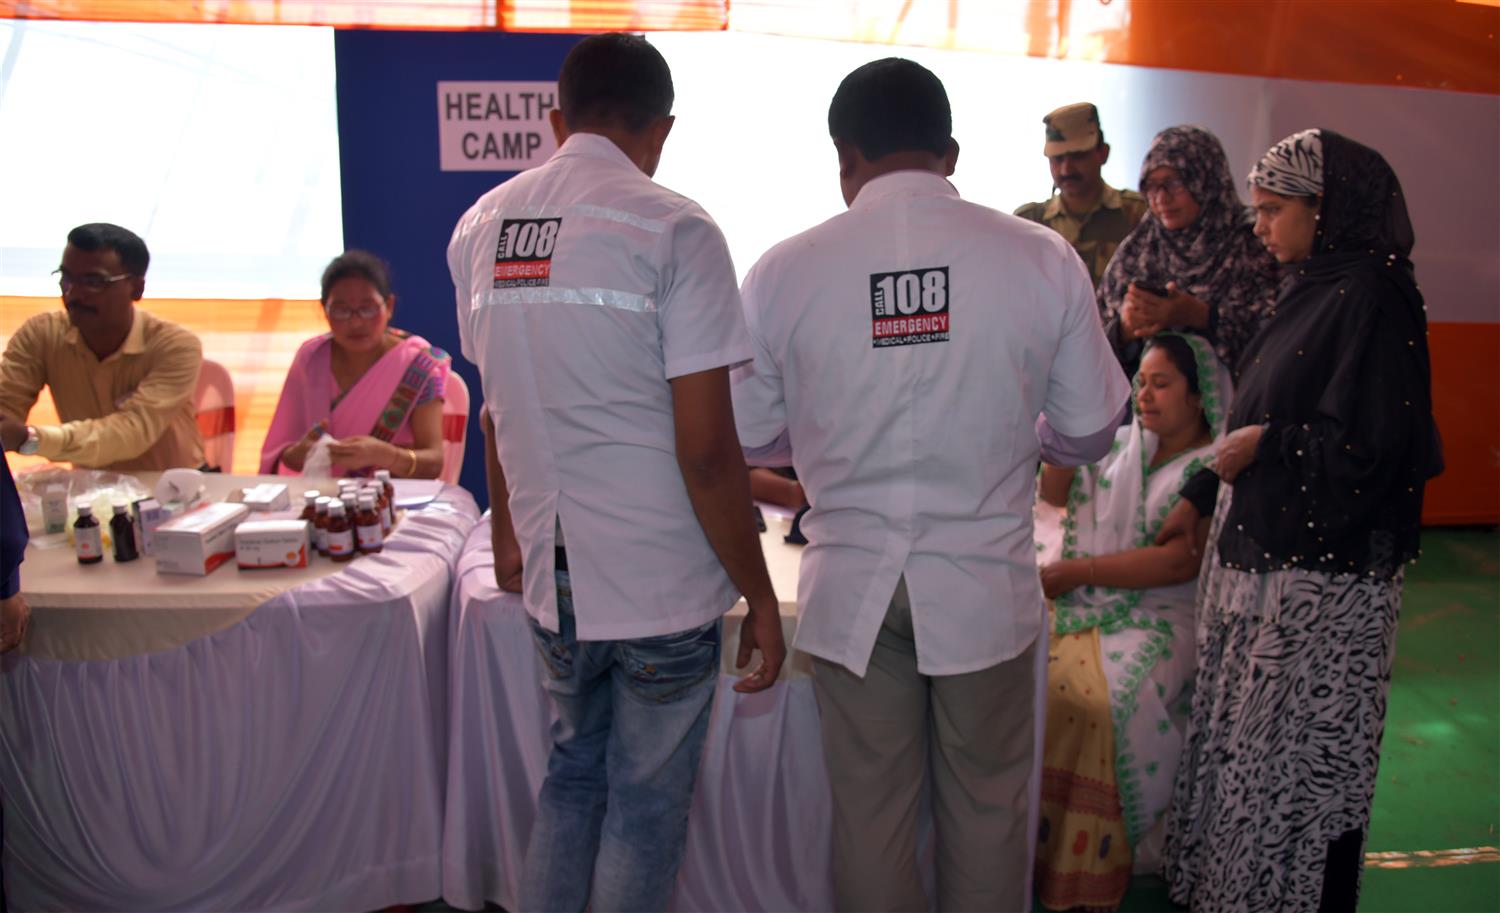 Regional Outreach Bureau, Guwahati under the Ministry of Information and Broadcasting organized an exhibition on Intensified Mission Indradhanush 2.0 at Neherubali Play Ground at Nagaon today. Free Health check up and Immunization camp was also organized at the event in coordination with the District Health Department of Nagaon on 29th February  2020.

